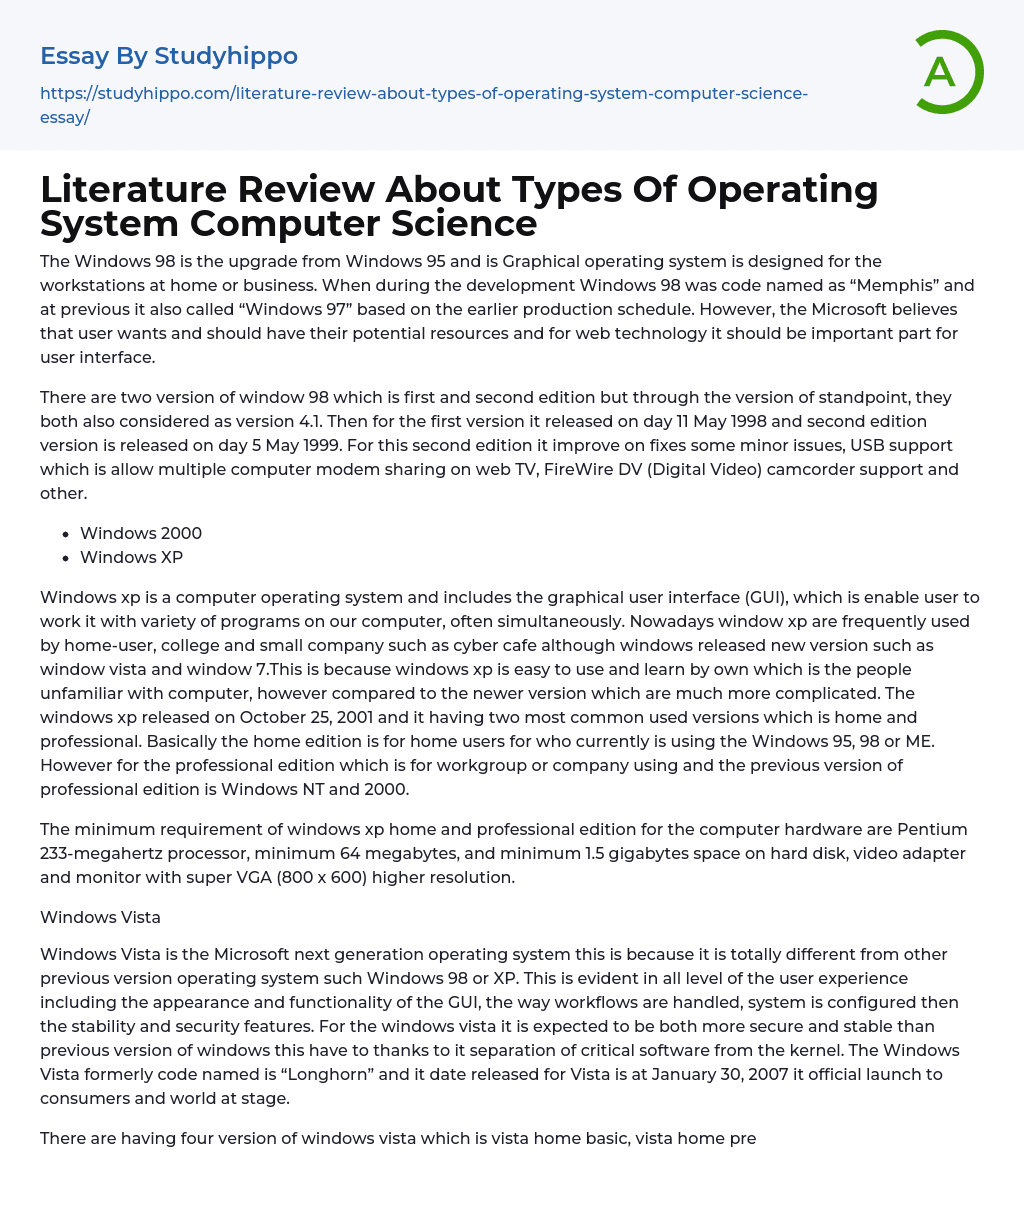 Literature Review About Types Of Operating System Computer Science Essay Example